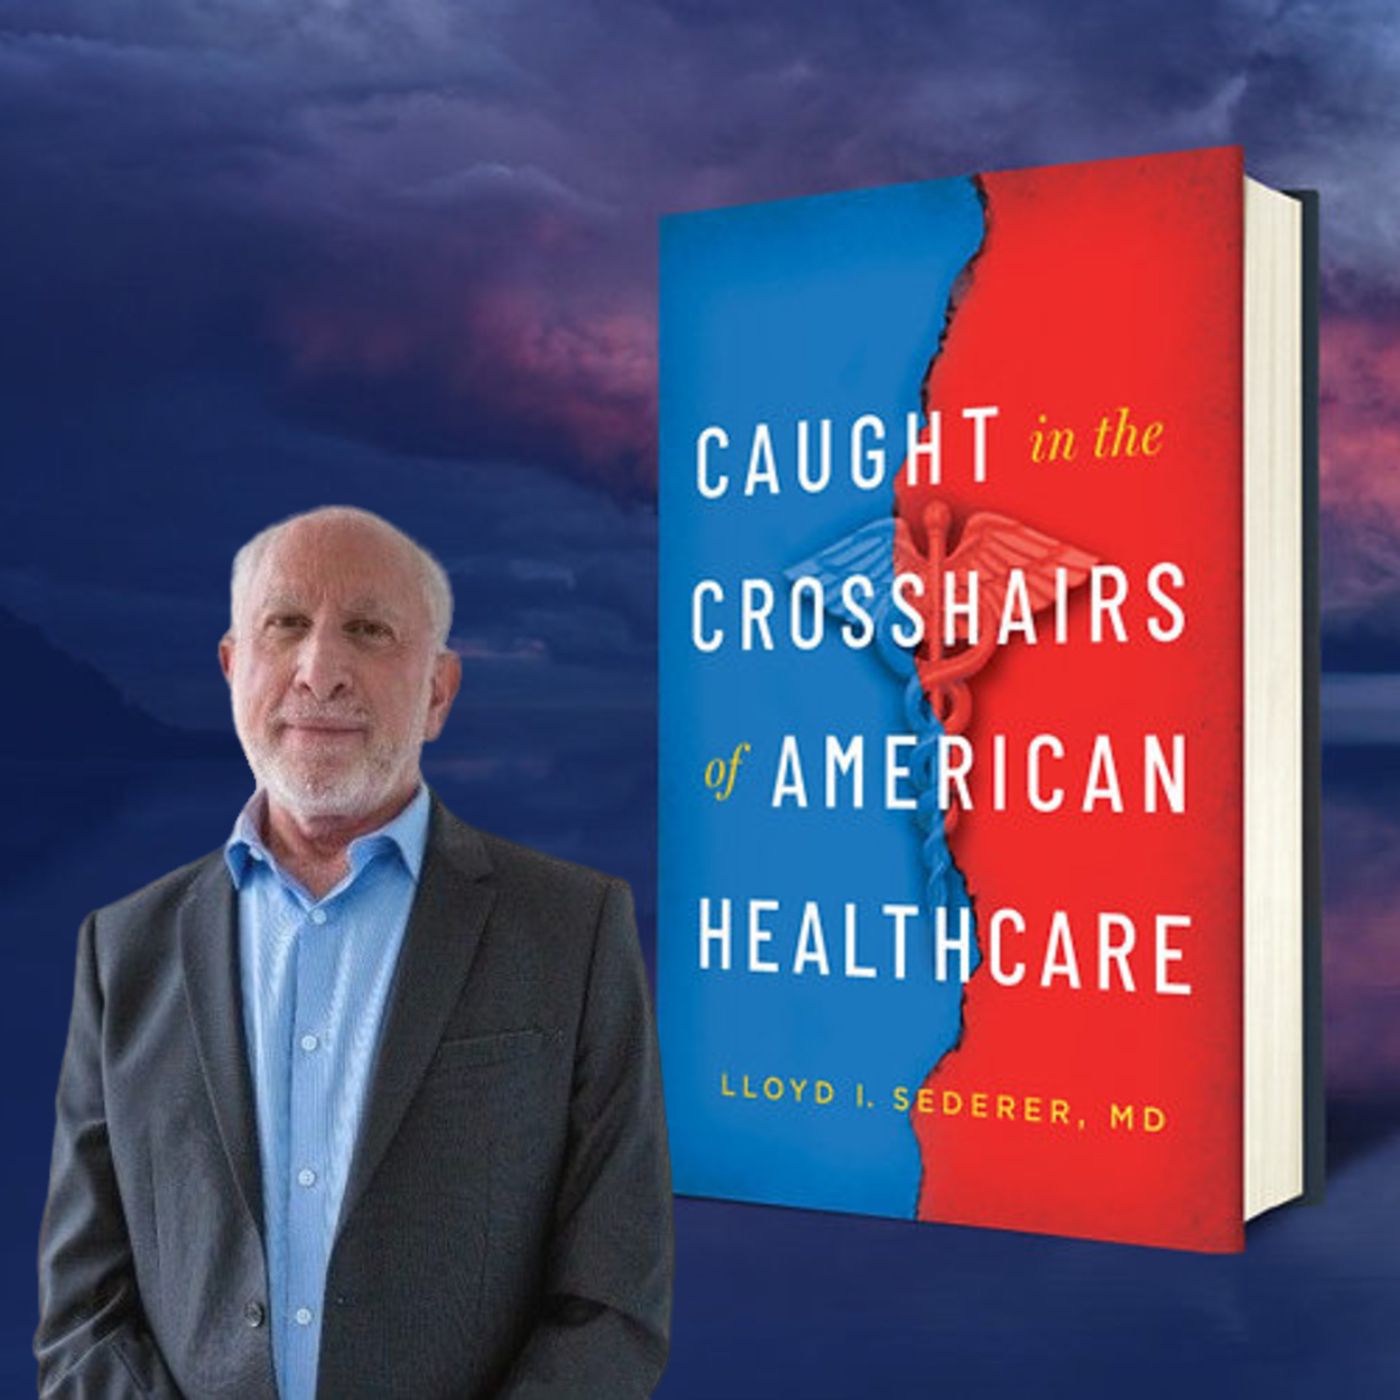 Caught in the Crosshairs of American Healthcare by Lloyd Sederer, M.D.